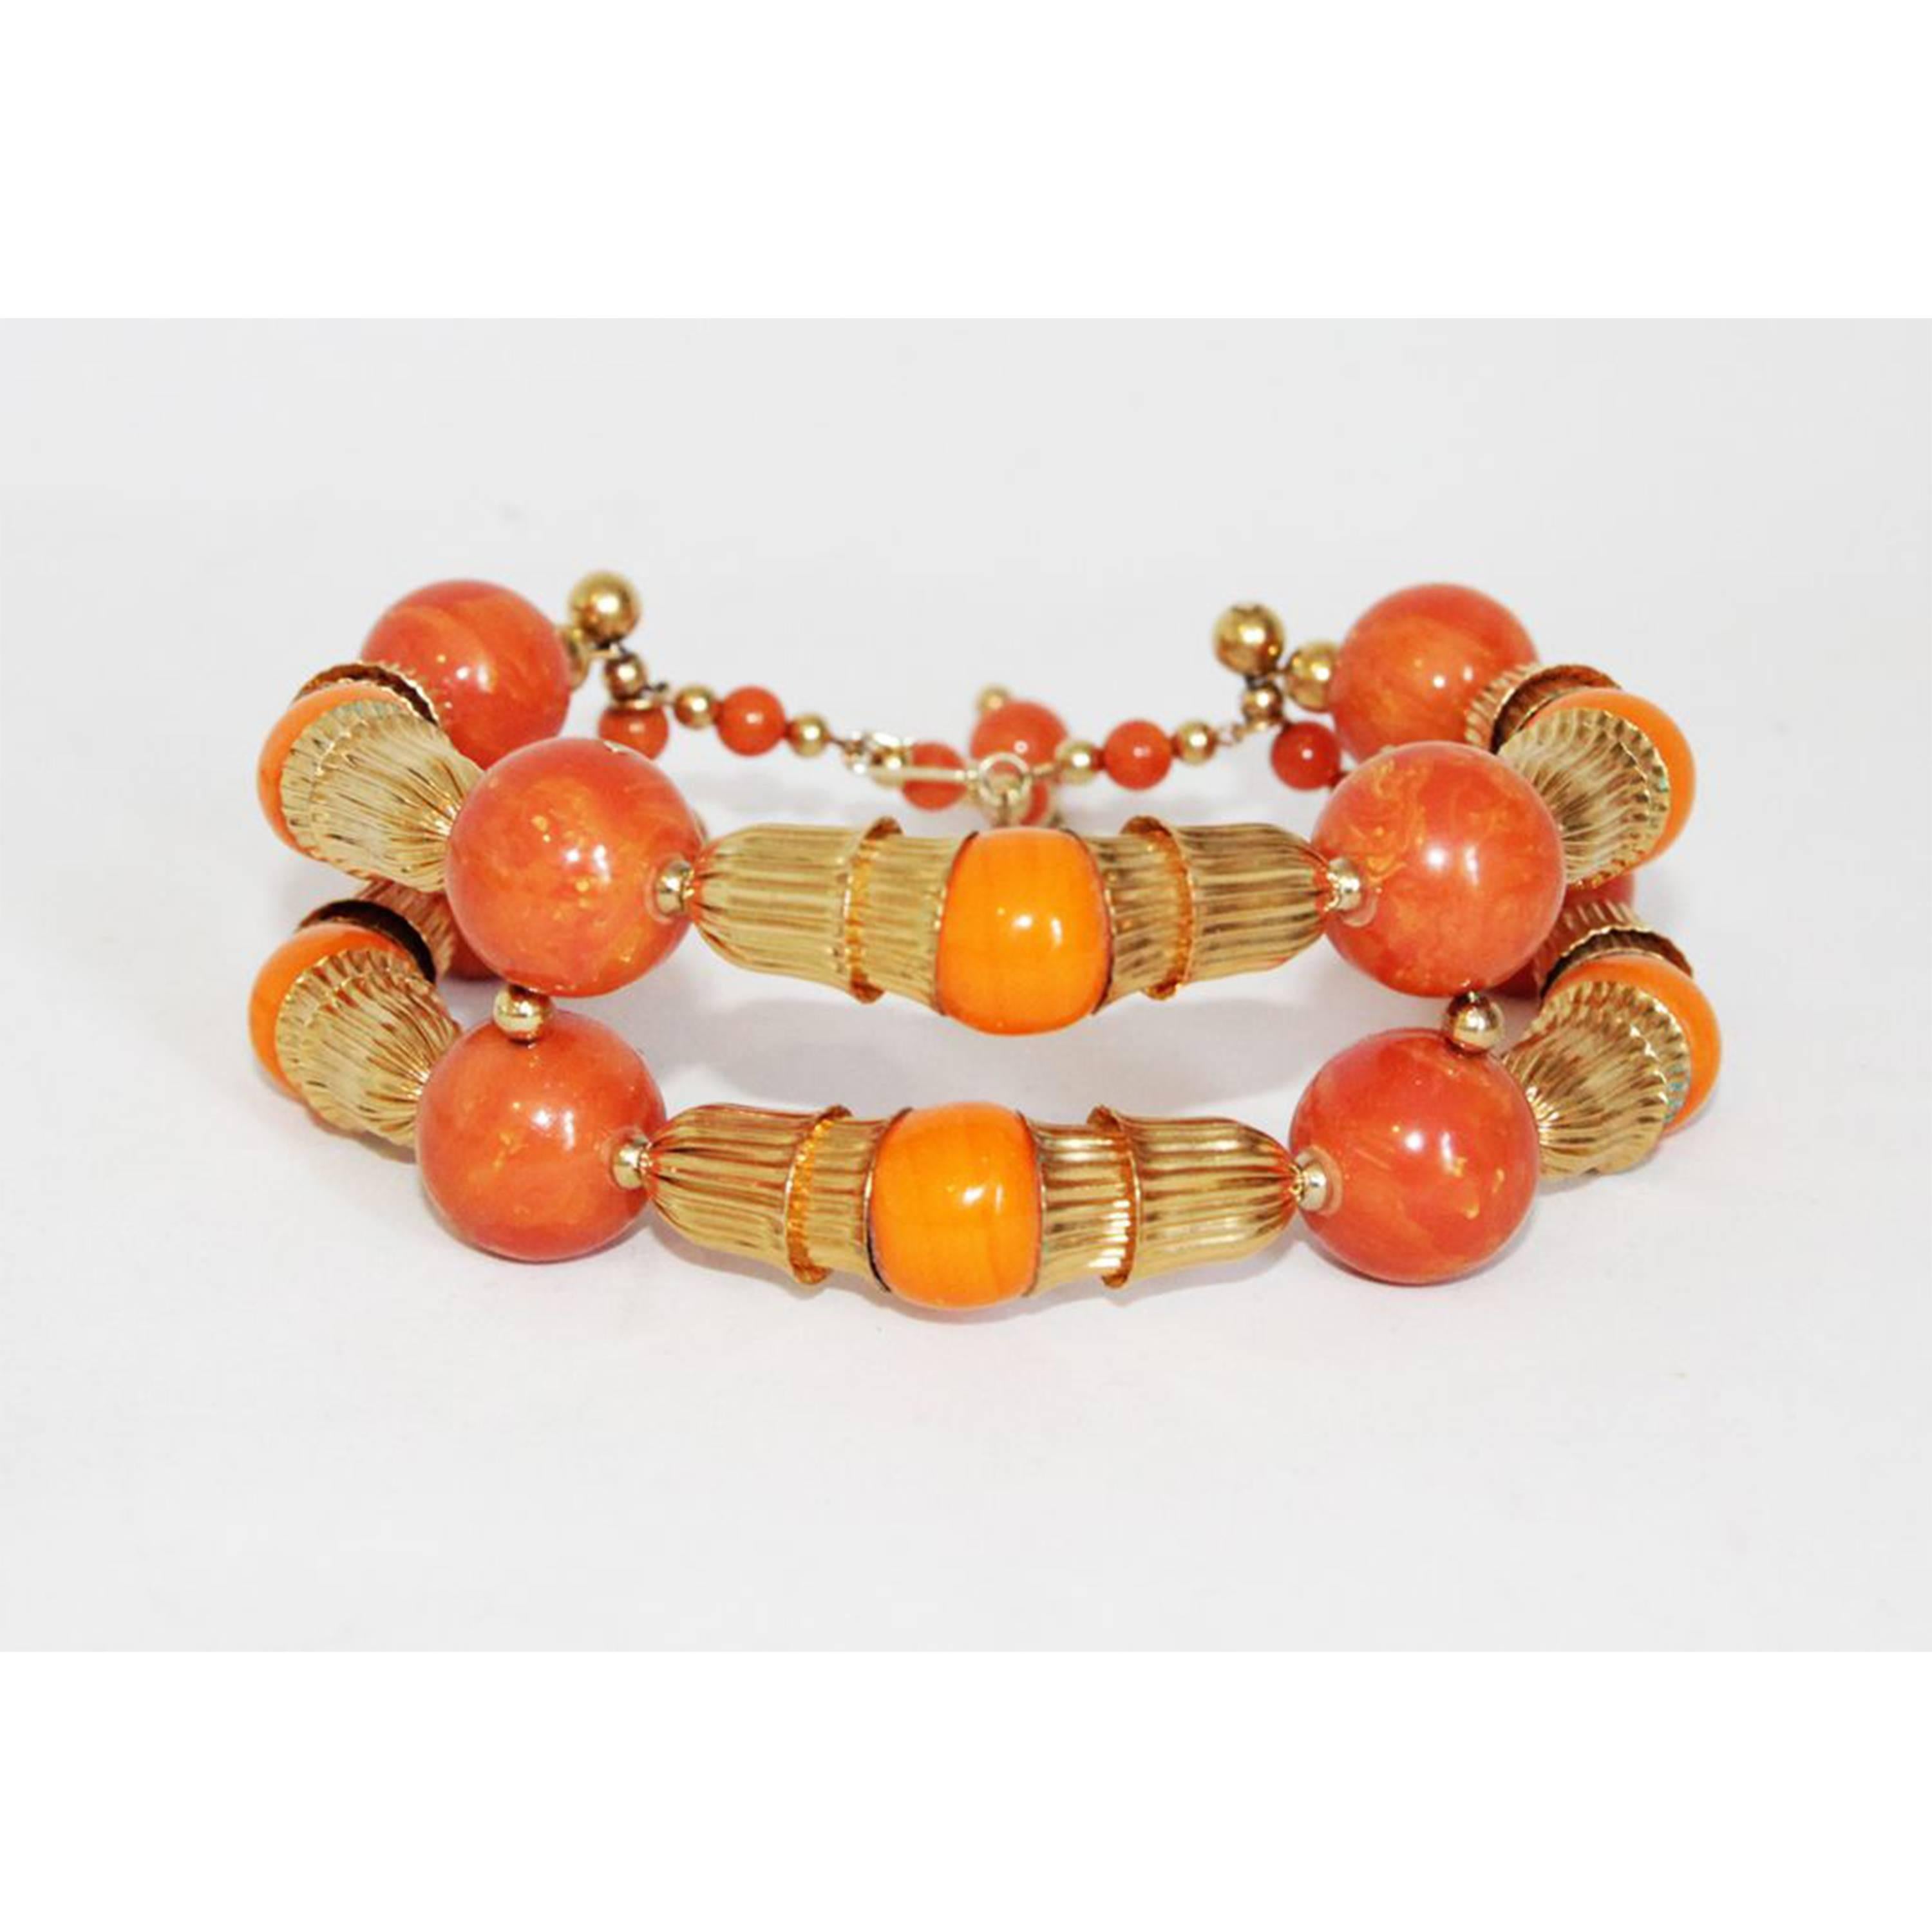 Gorgeous summer Kenneth Jay Lane vintage necklace of the 70s. Made of resin orange and coral beads and gilt metal.  

Marked : Kenneth Lane

Size : 42 x 5 cm - 16.5 x 2 in. 

Excellent condition. 